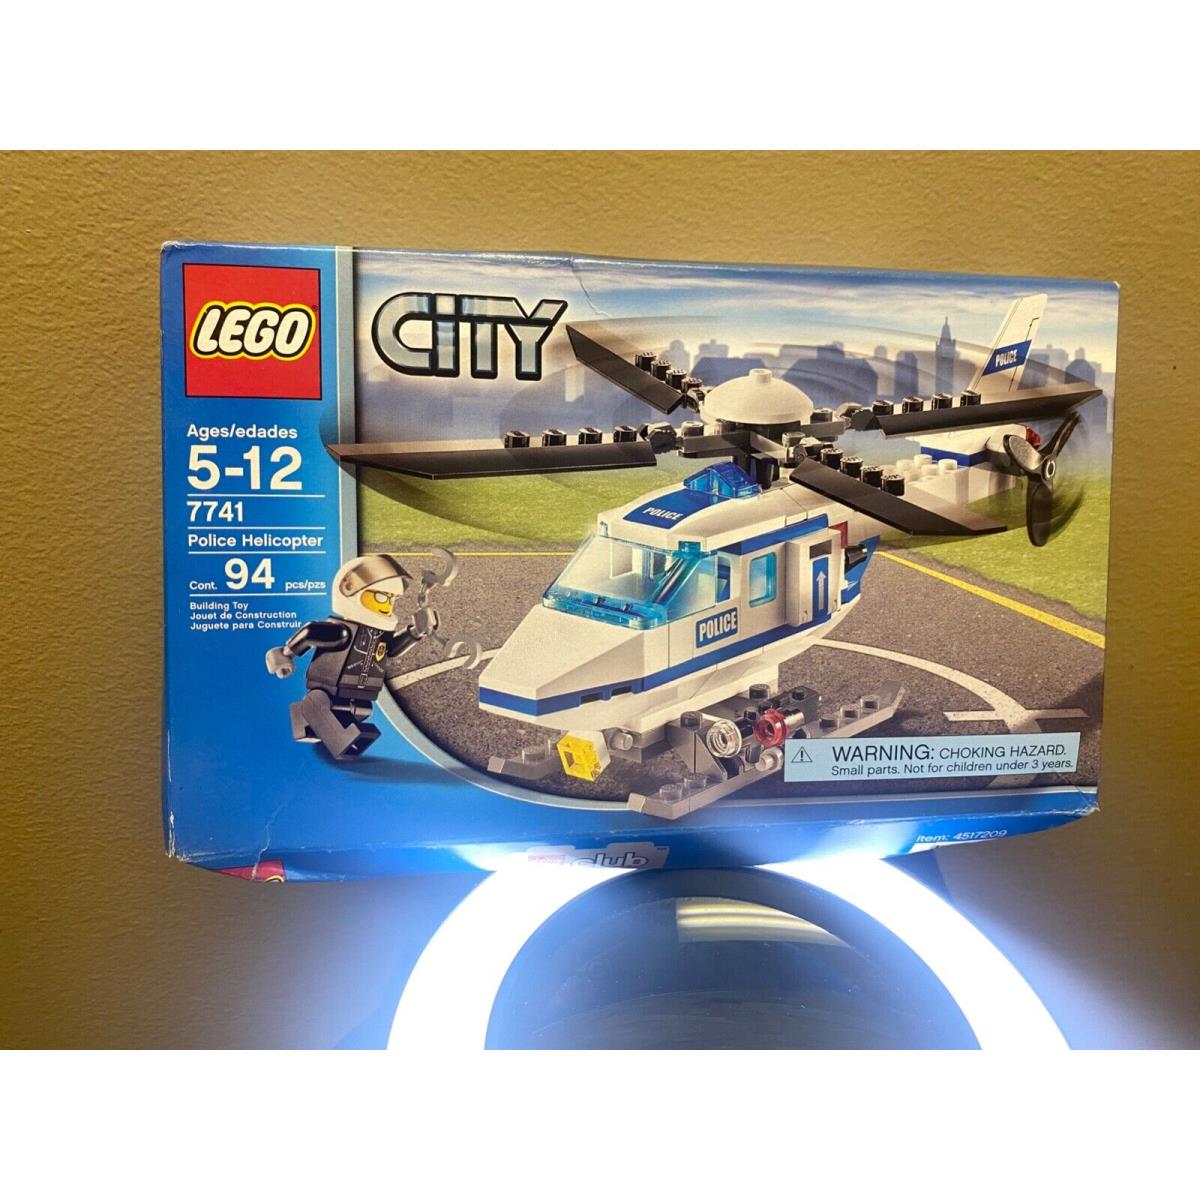 Lego City Police Helicopter 7741 Building Toy Ages 5-12